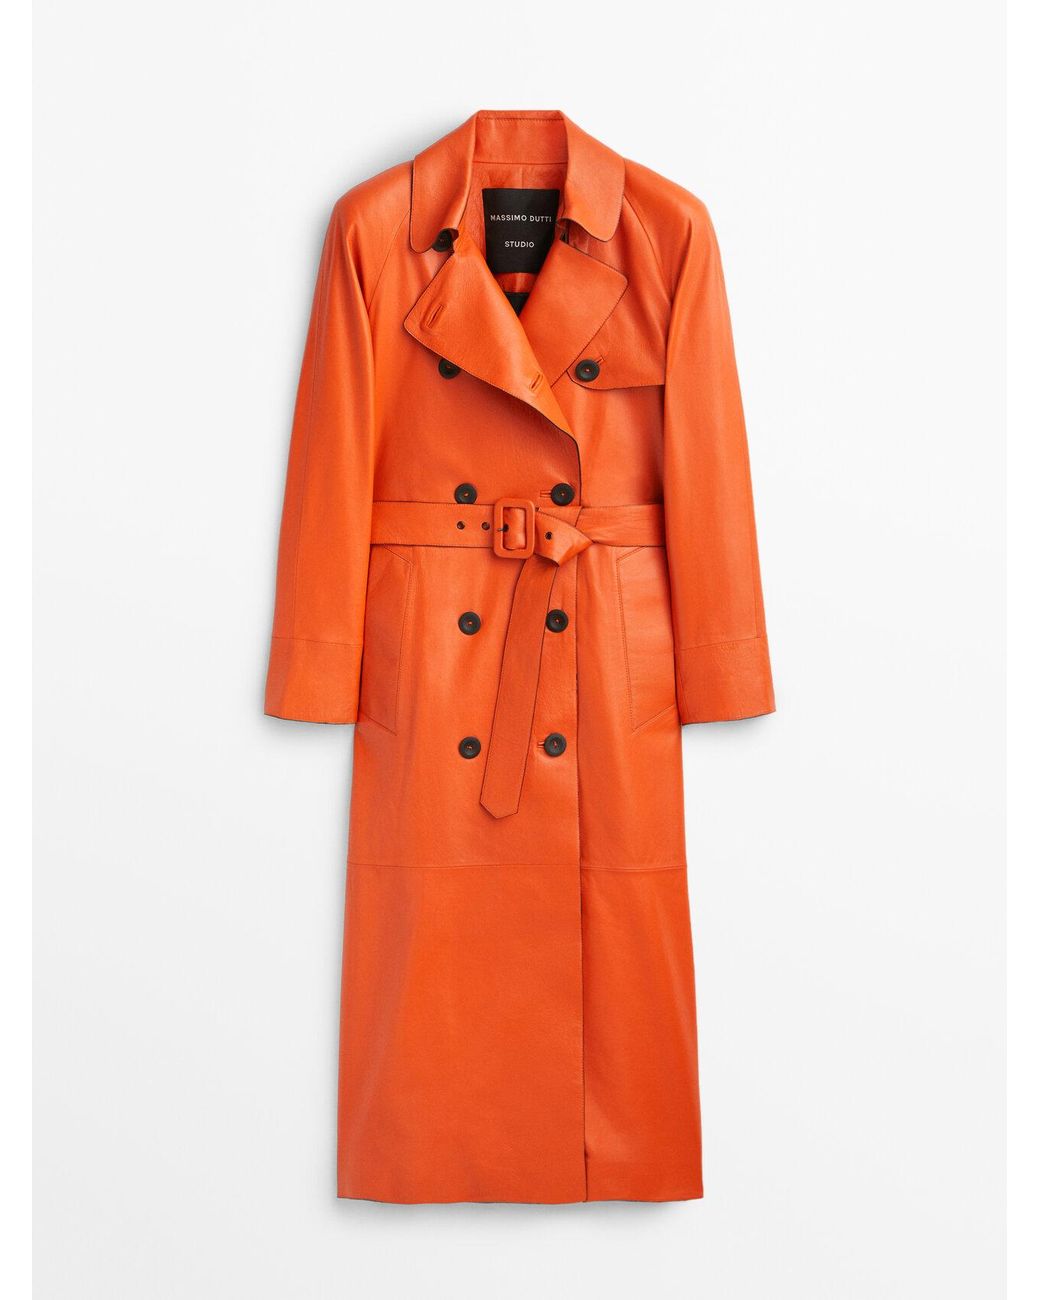 MASSIMO DUTTI Nappa Leather Trench-style Coat With Belt - Studio in ...